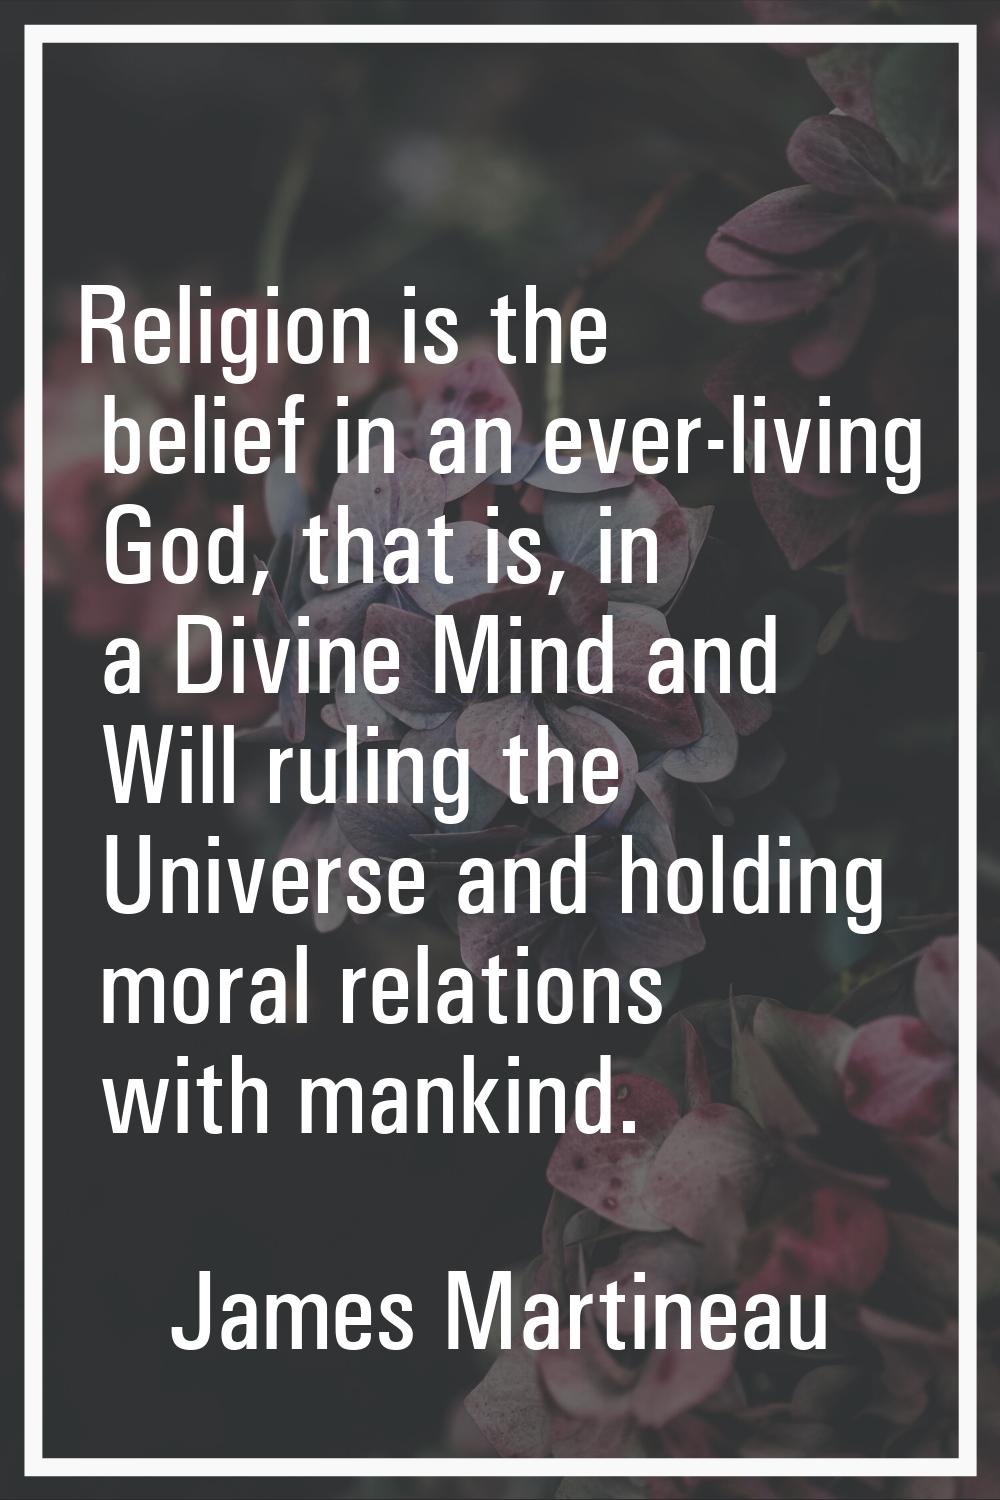 Religion is the belief in an ever-living God, that is, in a Divine Mind and Will ruling the Univers